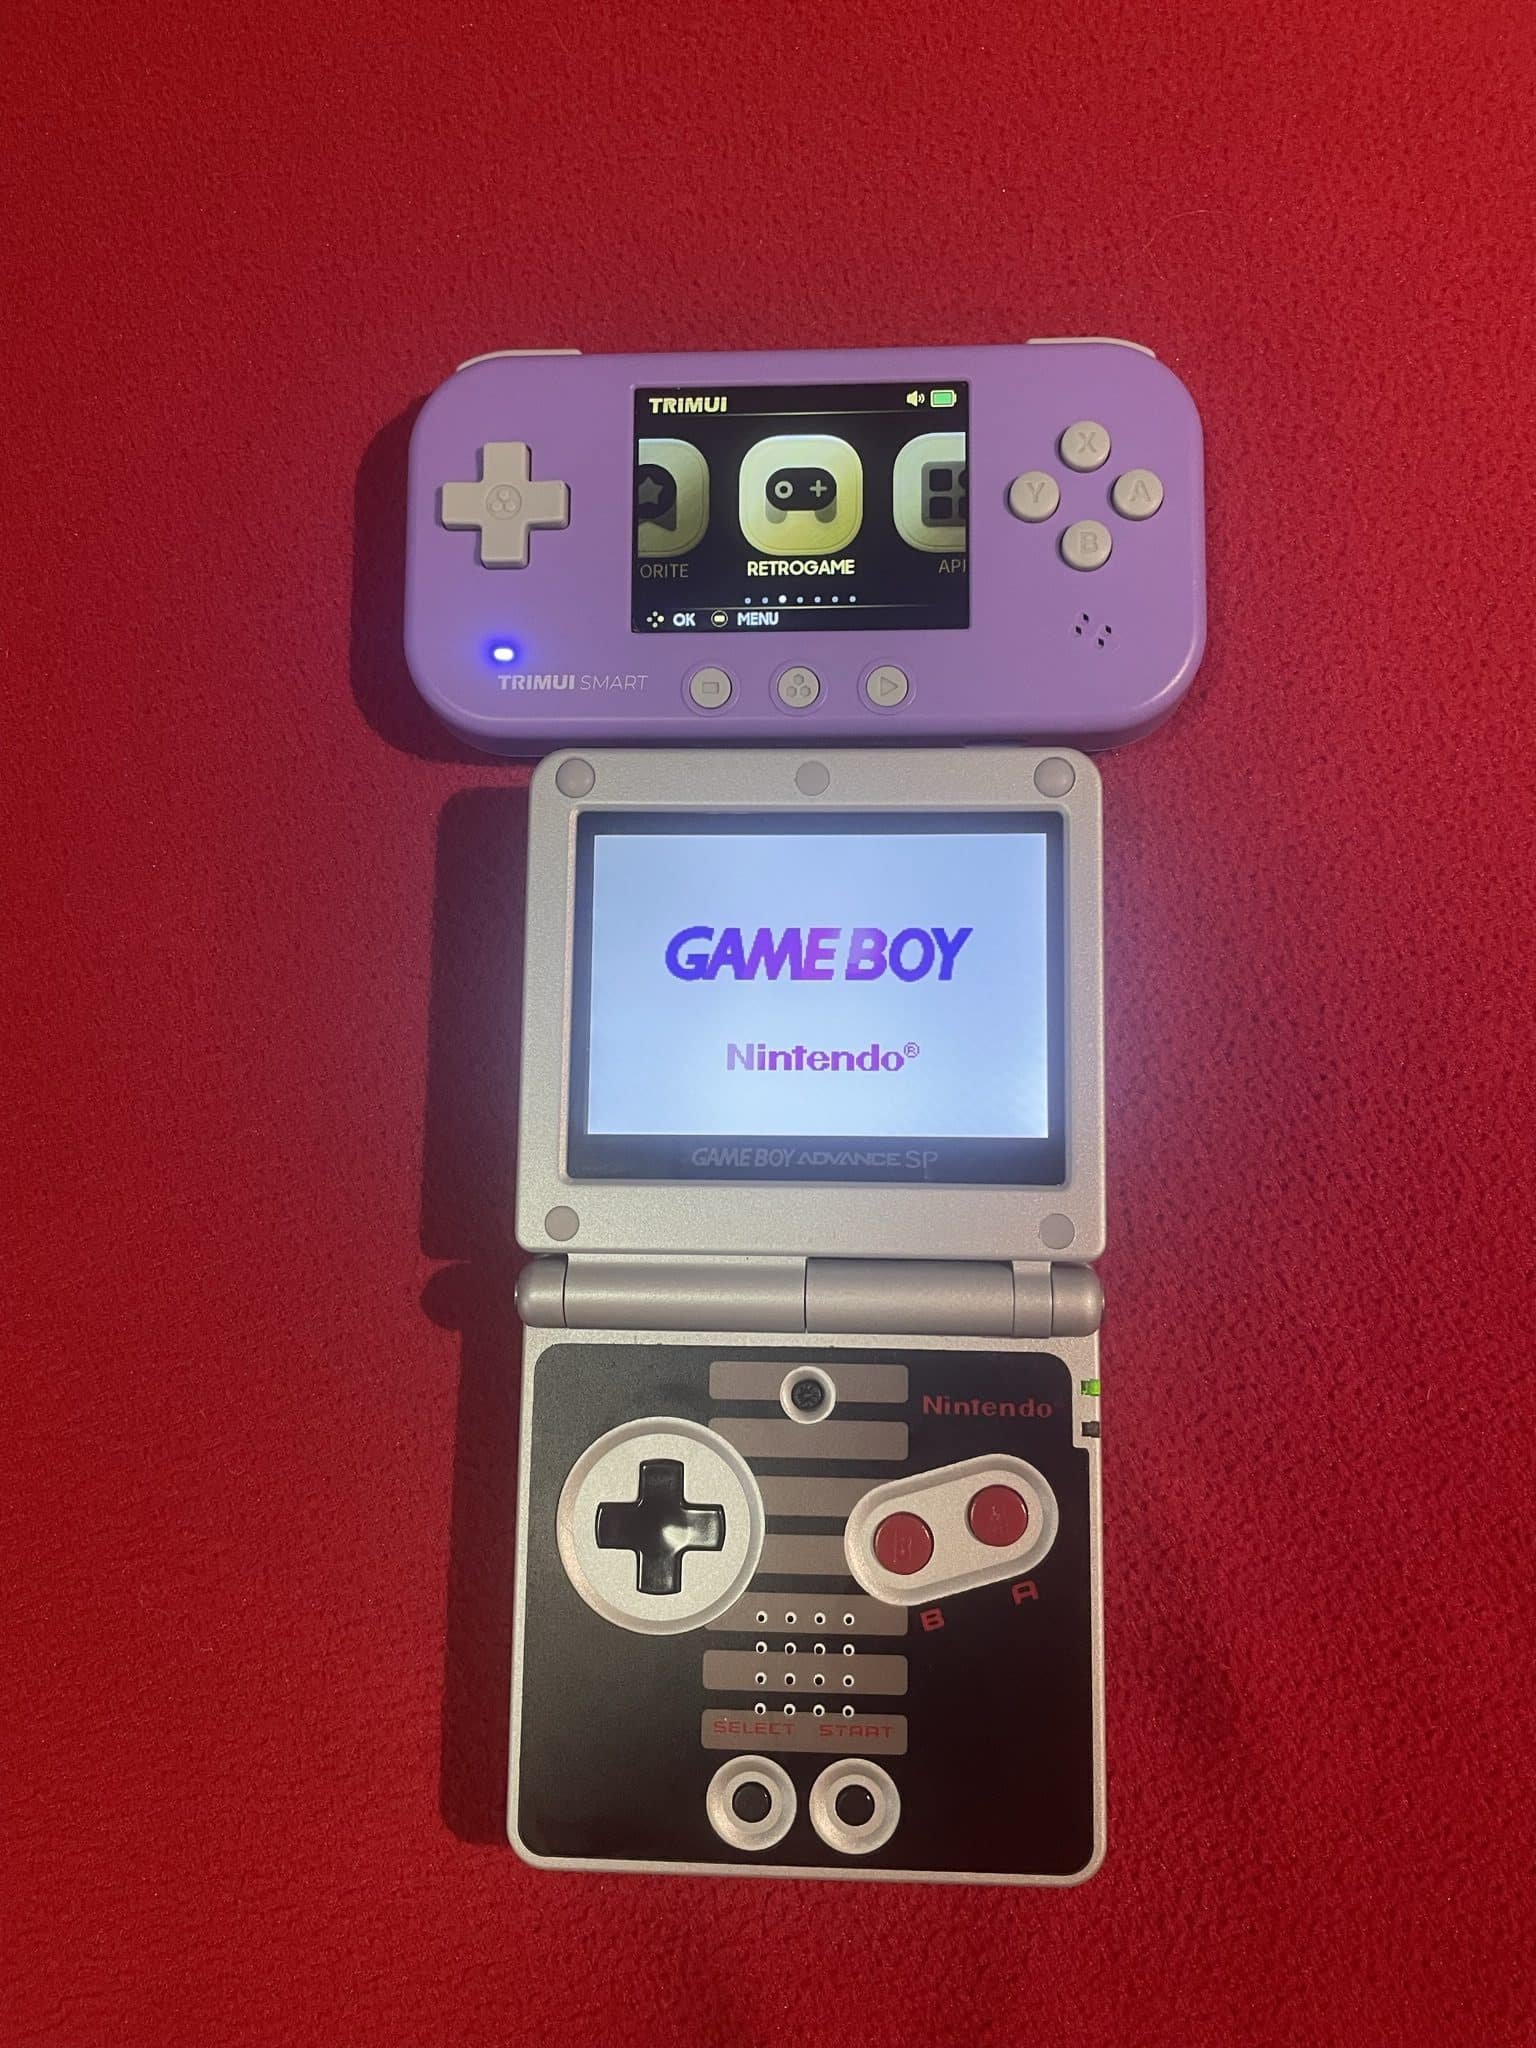 Trimui smart handheld emulation device compared to a gba sp. - the trimui smart is a comfortable, capable handheld held back by its tiny screen